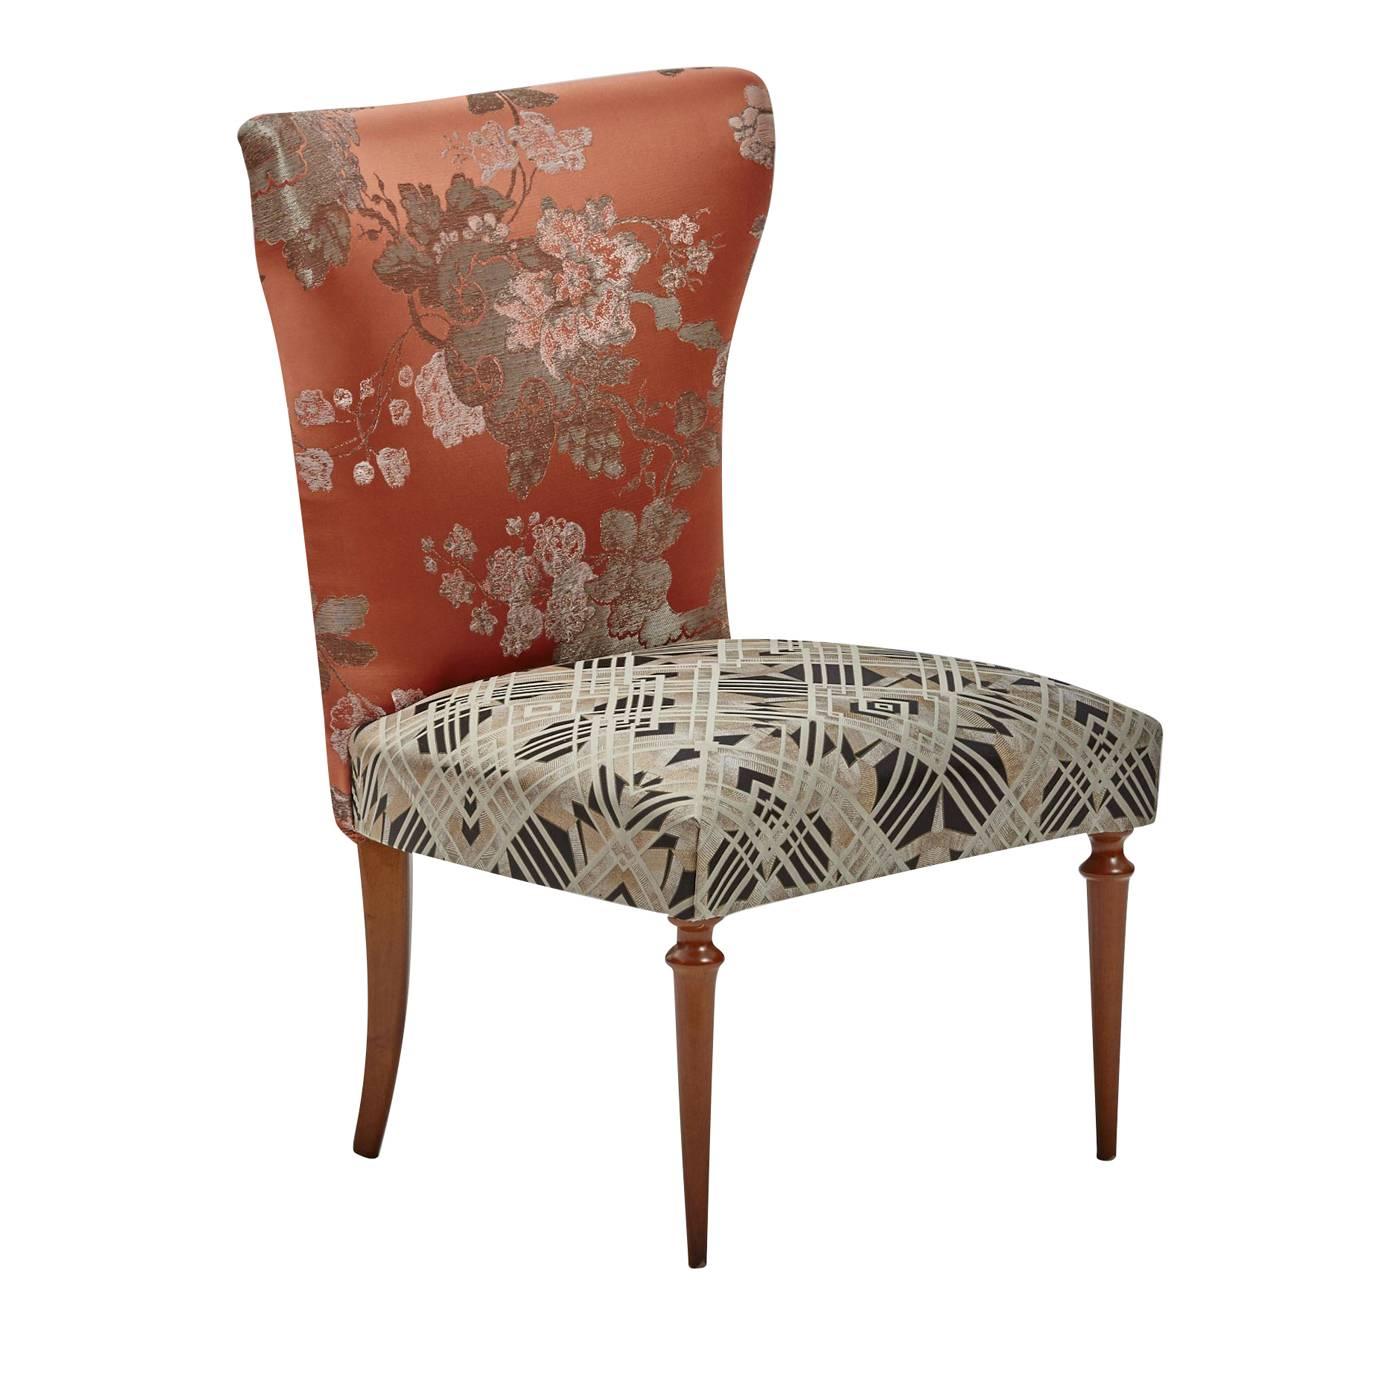 The Silhouette of this sophisticated chair is inspired by the elegant design of a vintage chair from the 1940s that Laura and Nino found. On the poplar and beech wood structure that they recreated, the backrest cushion is upholstered with a precious